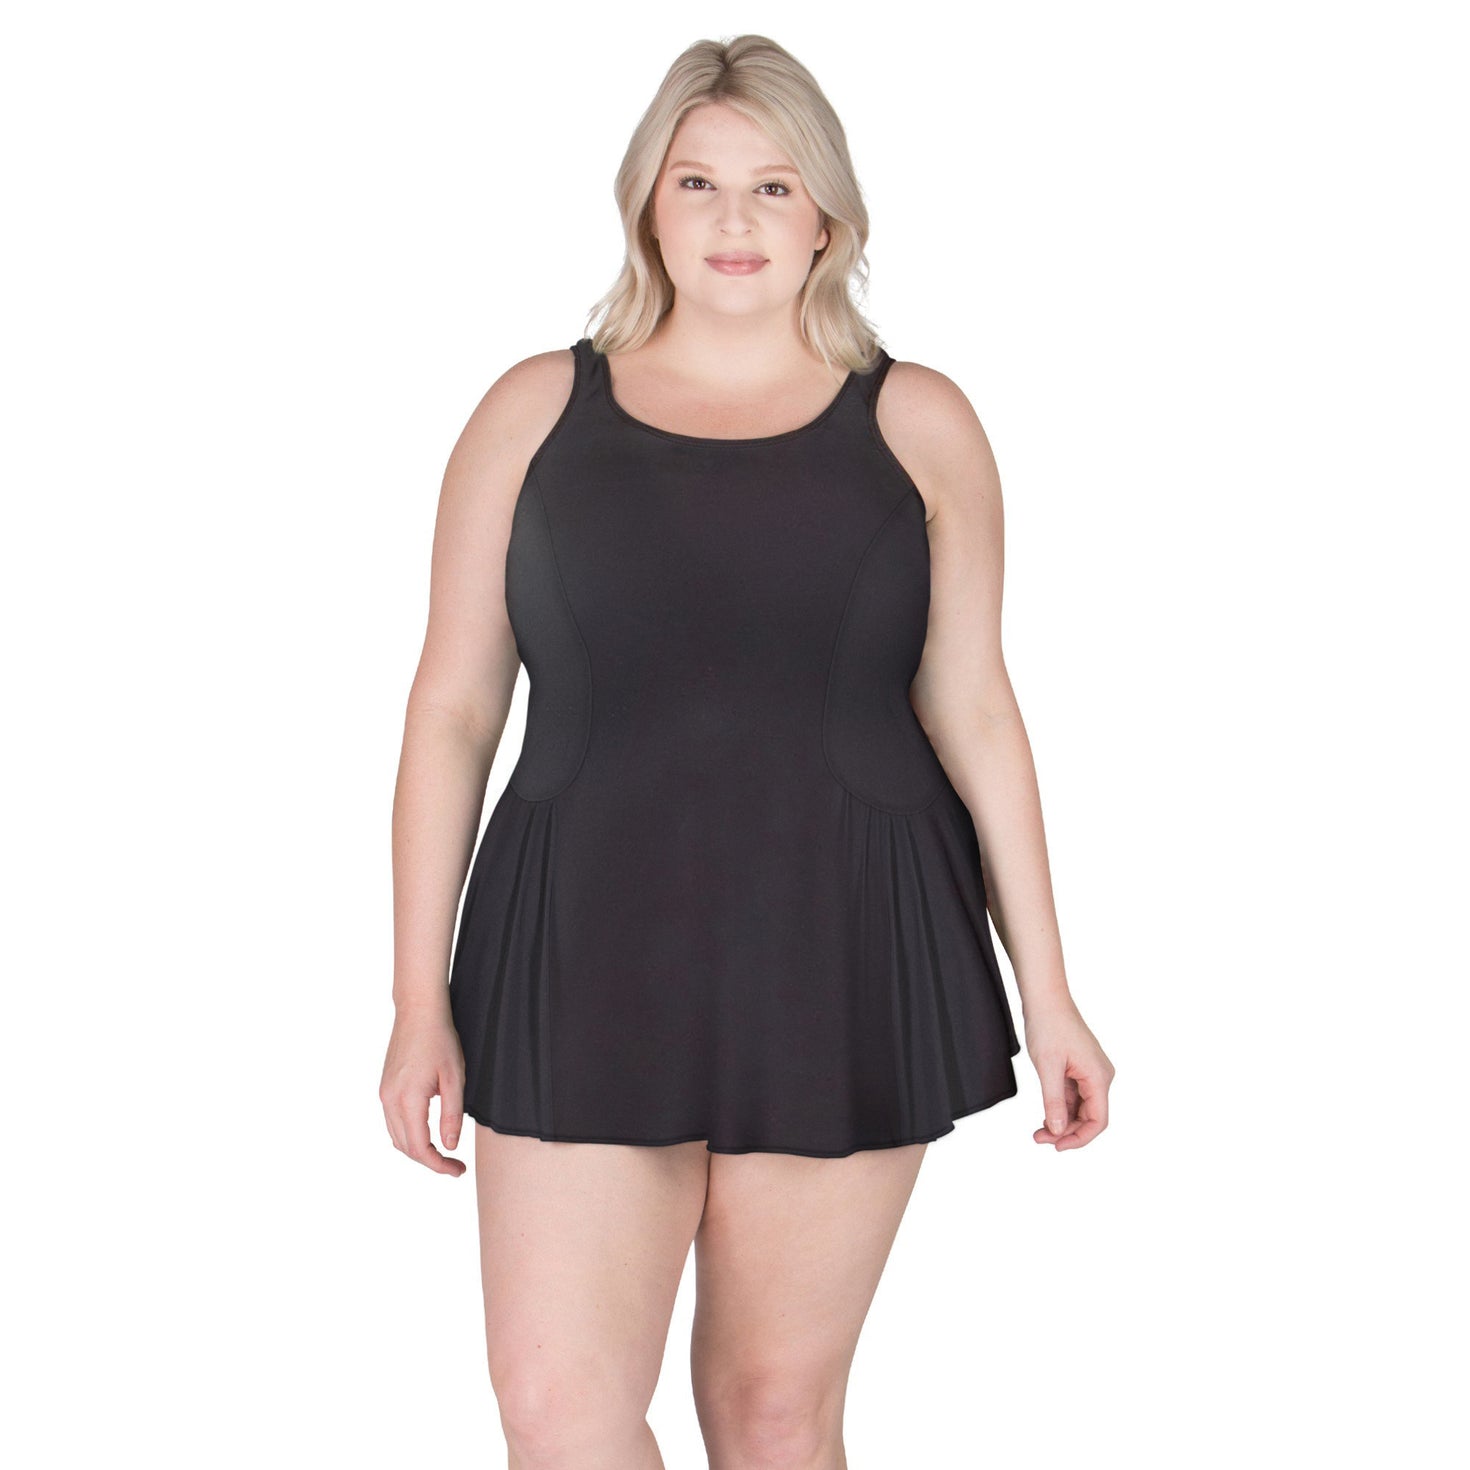 Black Plus Size Women's Swimdress at Swimsuits Just For Us @SJ4US